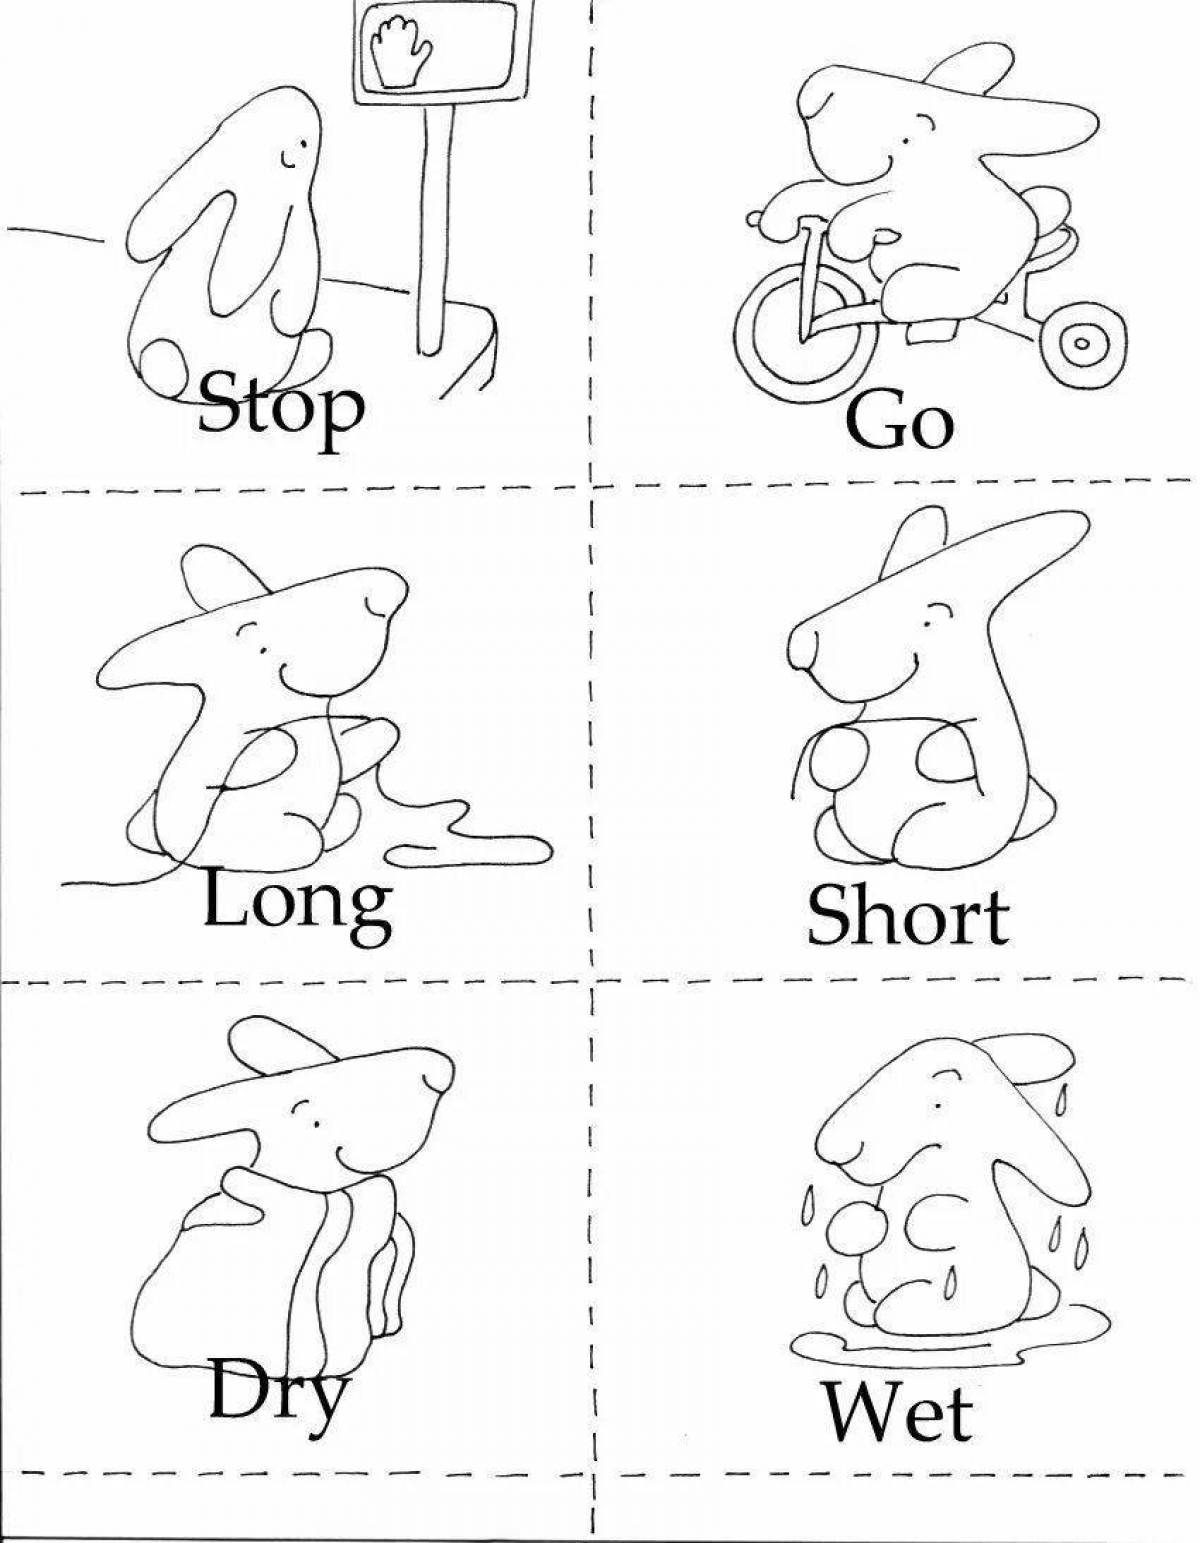 English coloring book for kids